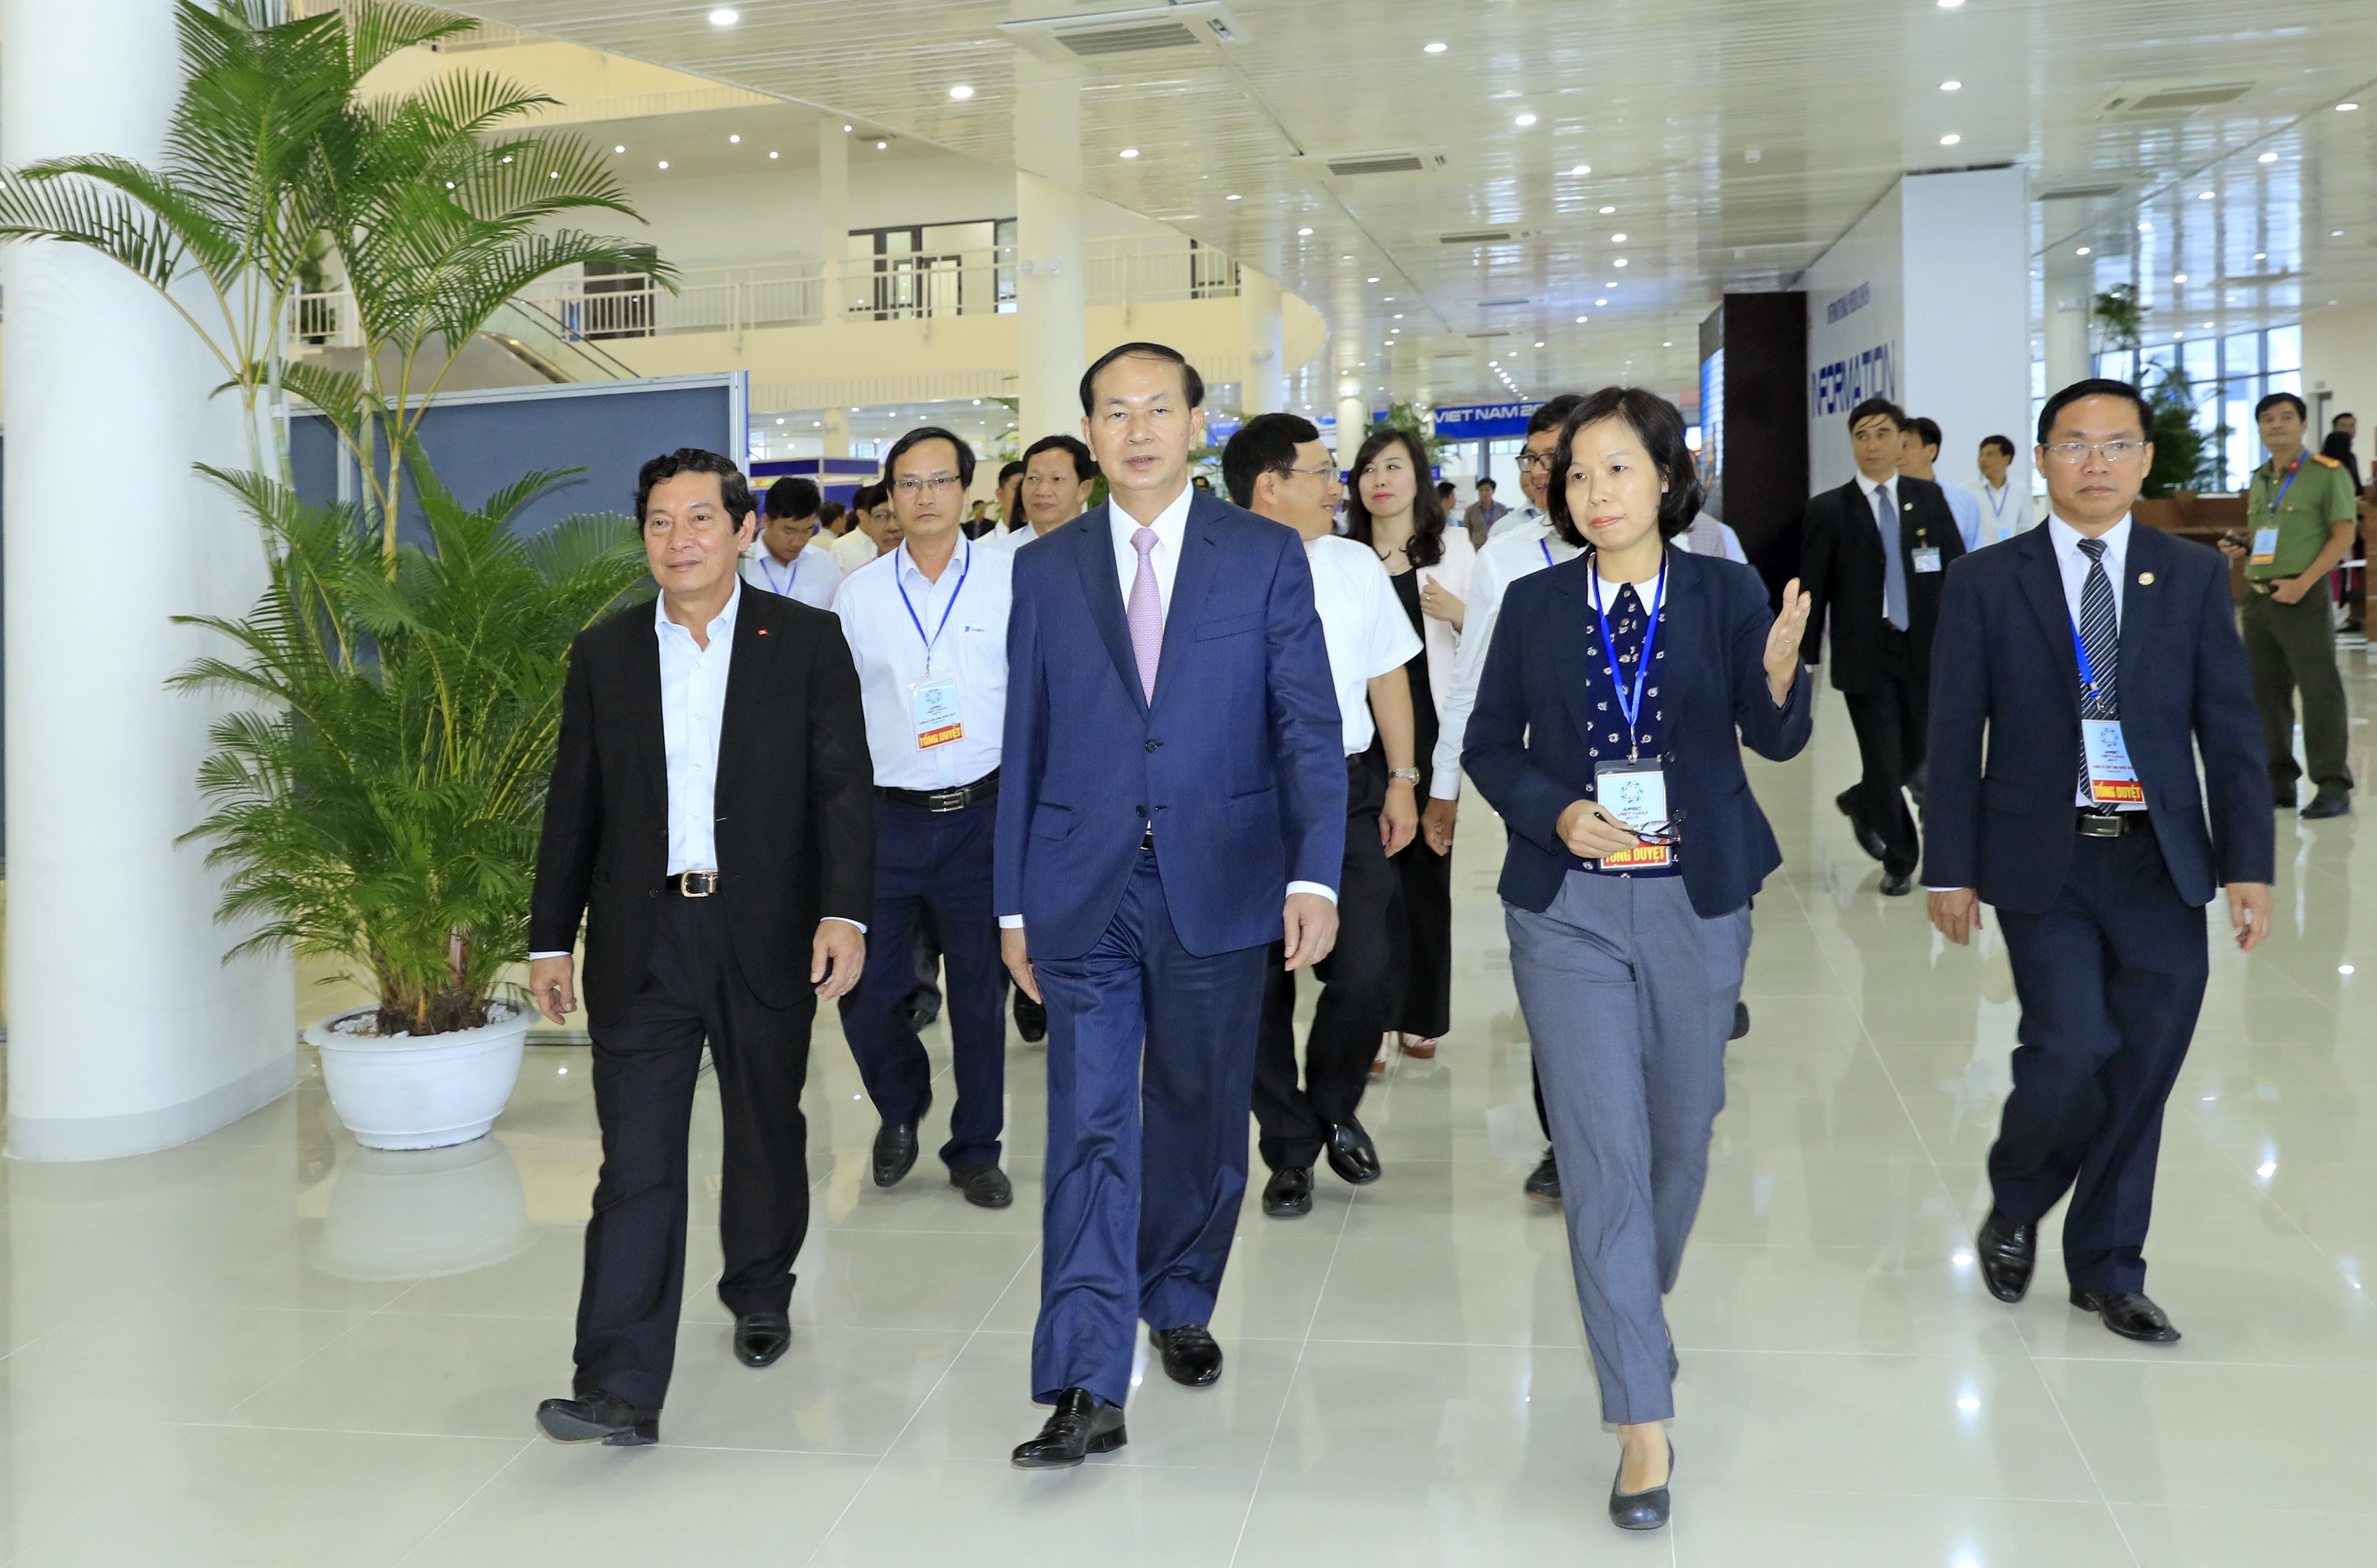 Vietnam’s proposals to generate new dynamism for APEC